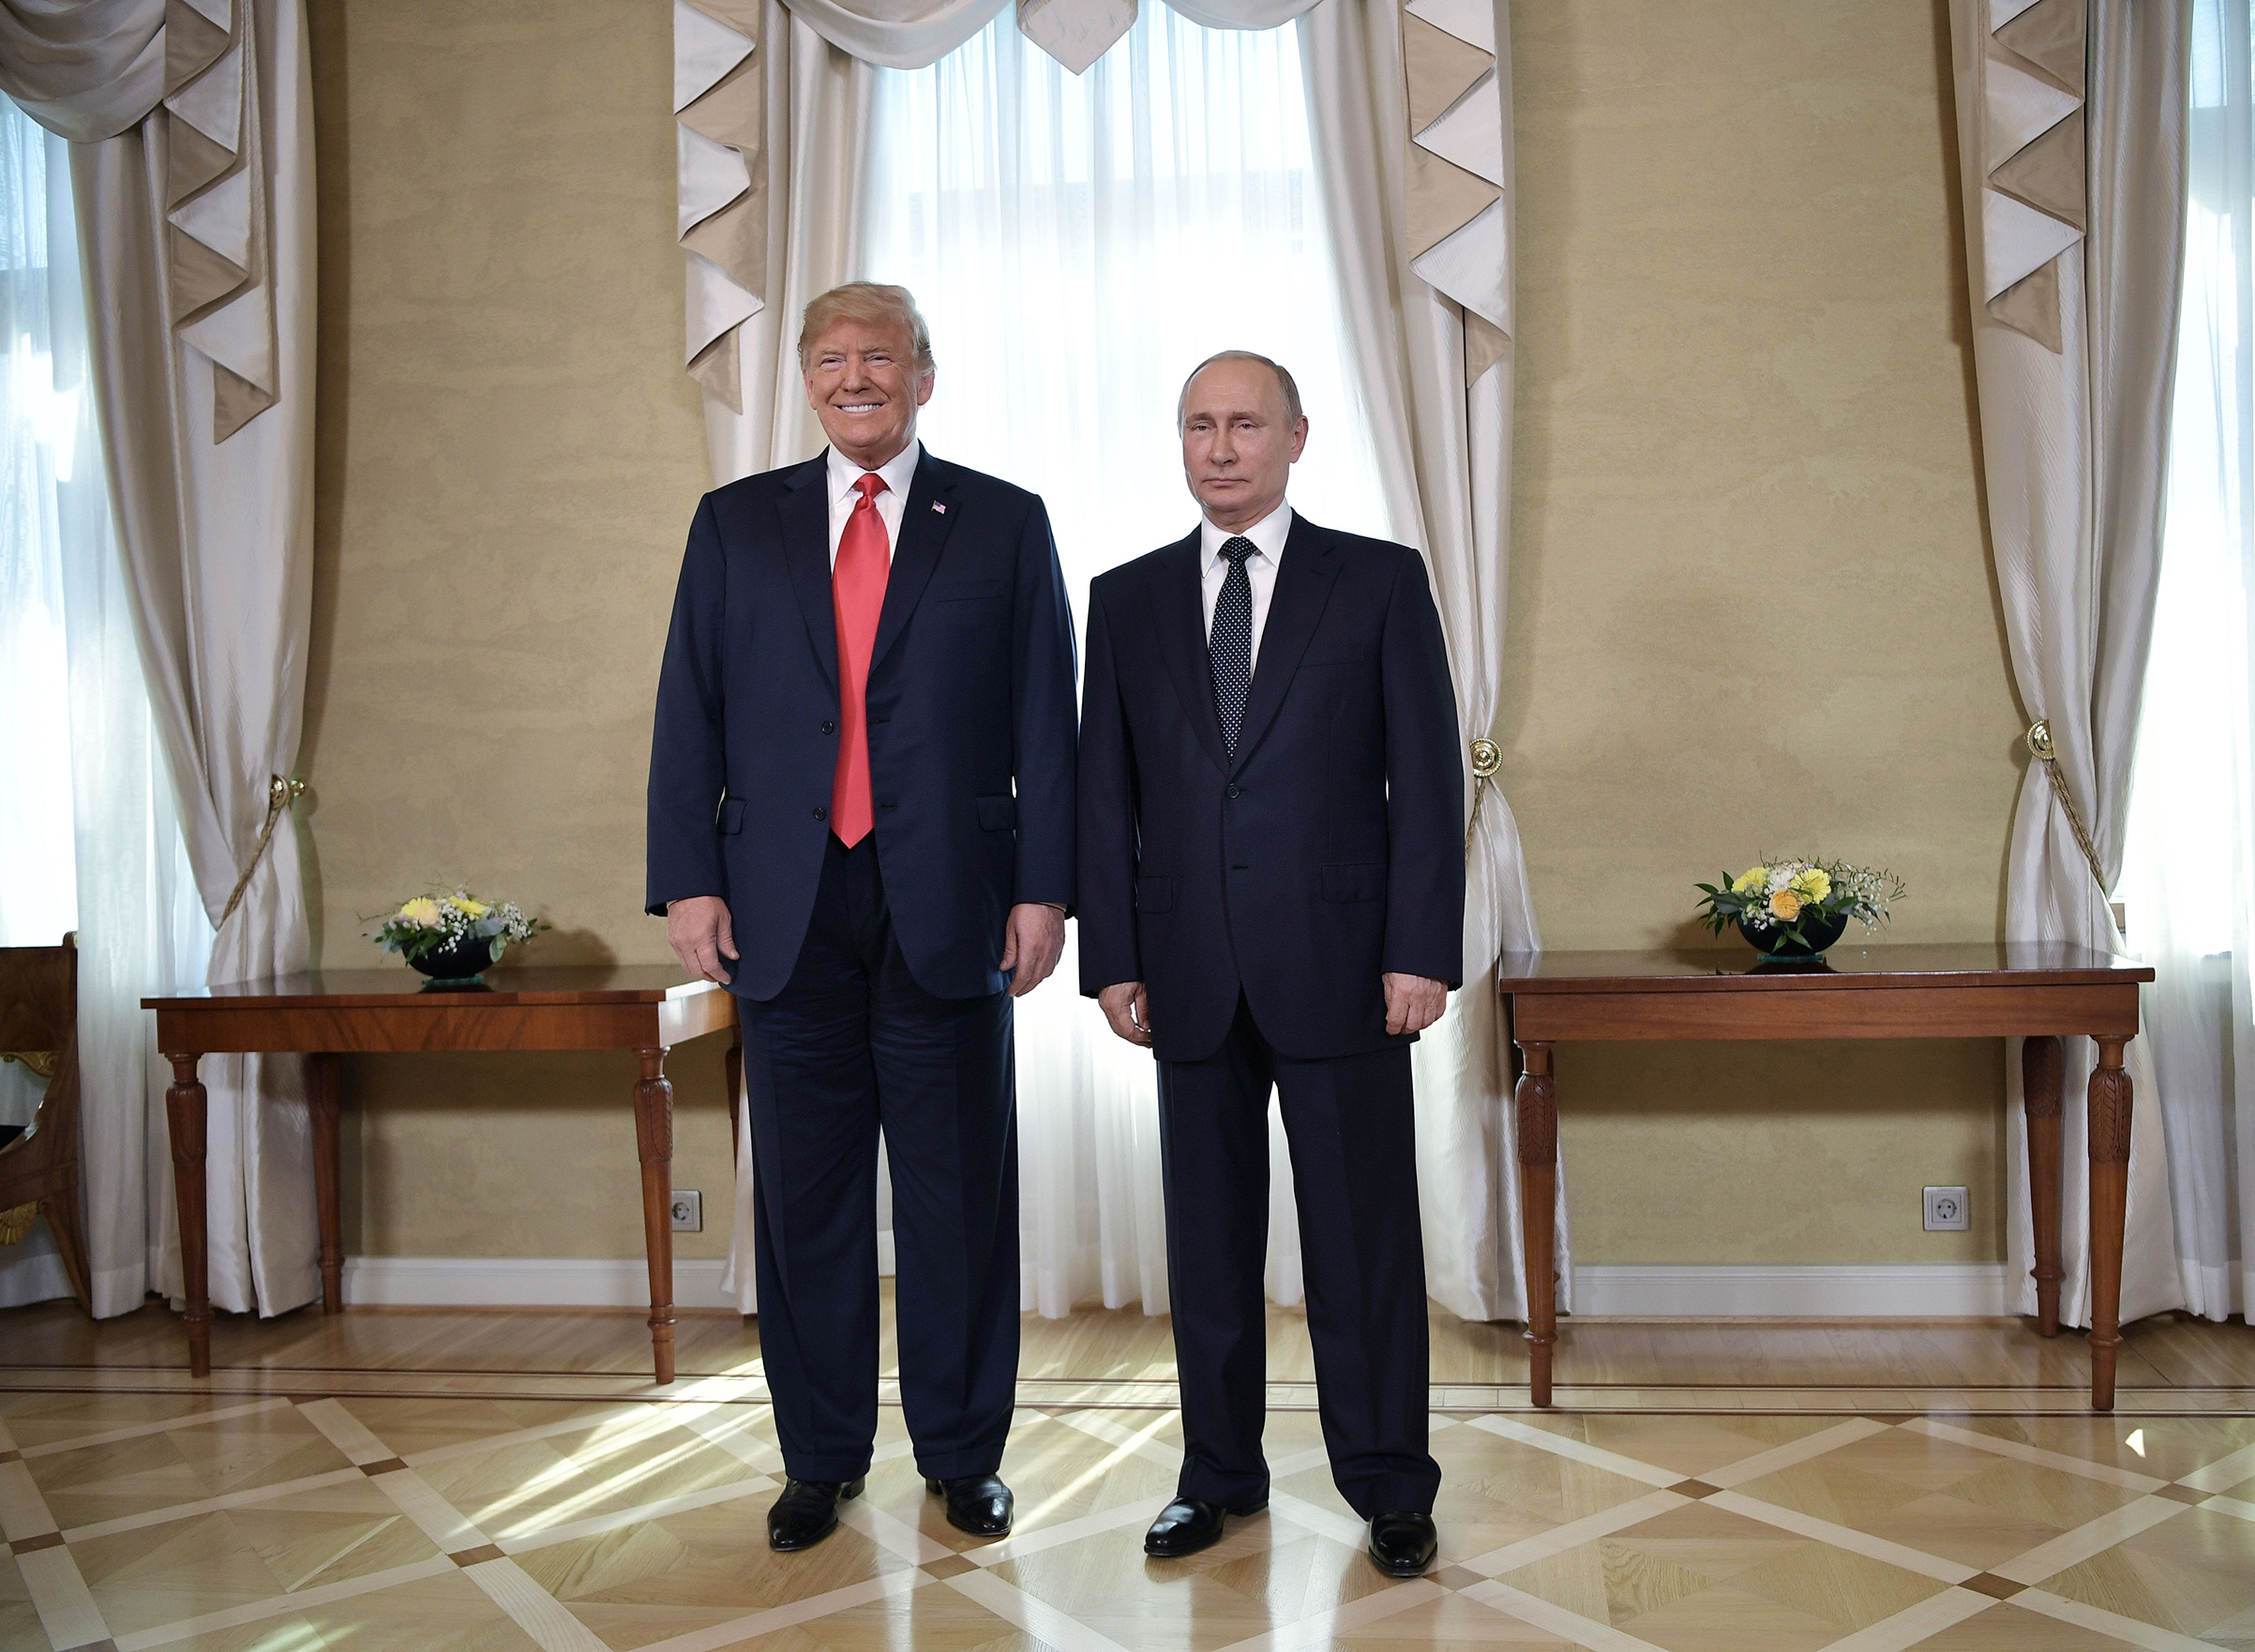 US President Donald Trump and Russia's President Vladimir Putin pose ahead a meeting in Helsinki, on July 16, 2018. (Alexey Nikolsky—AFP/Getty Images)